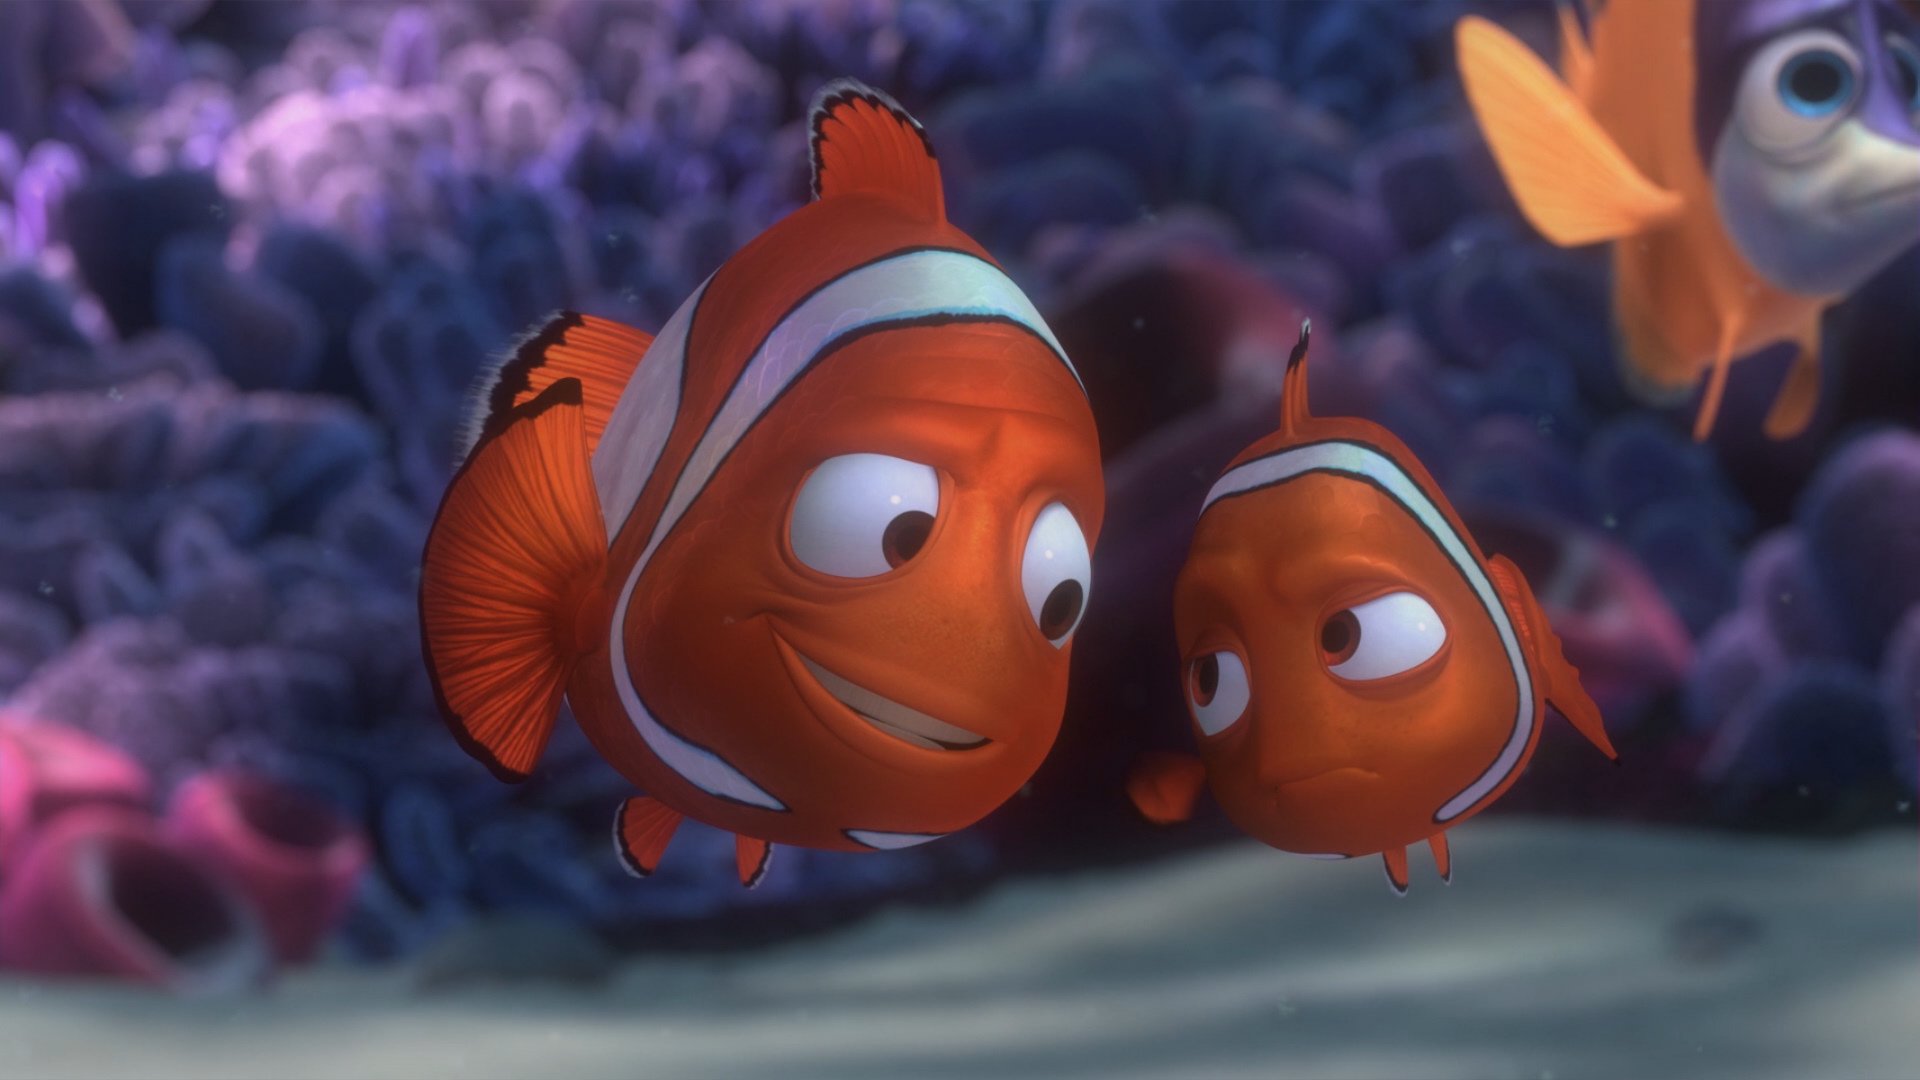 A scene from Finding Nemo 